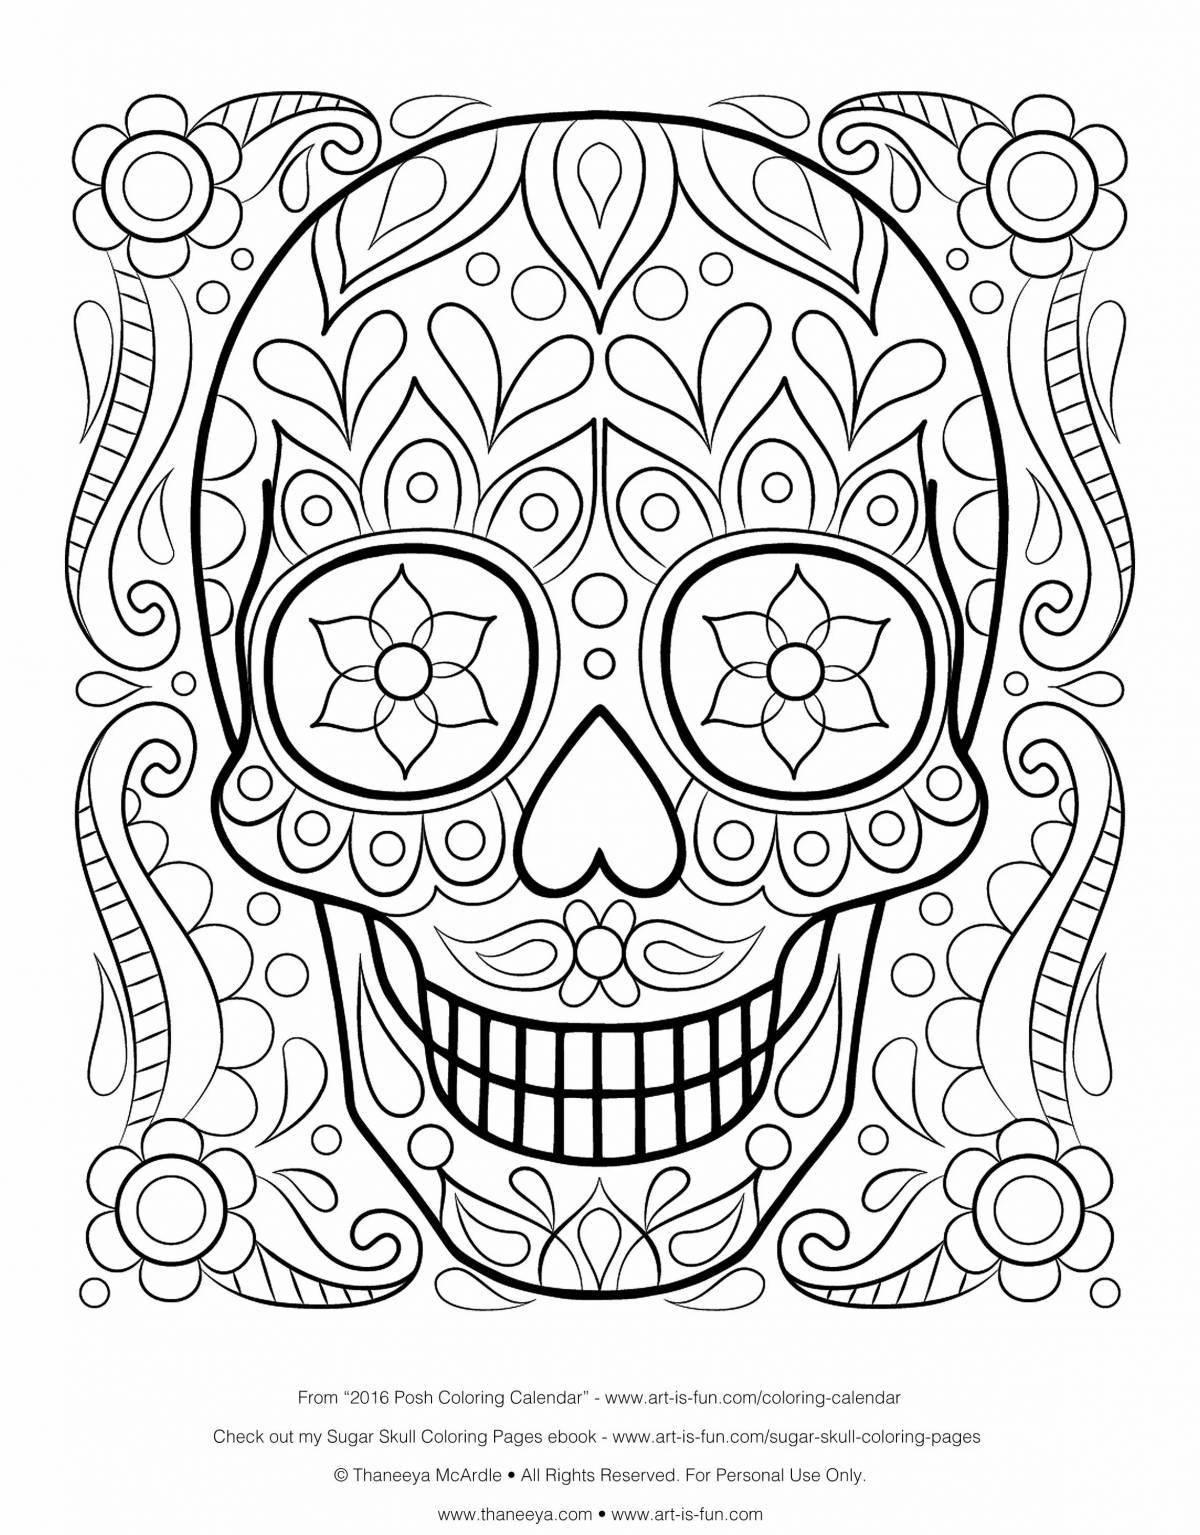 Incredible coloring page 12 cool